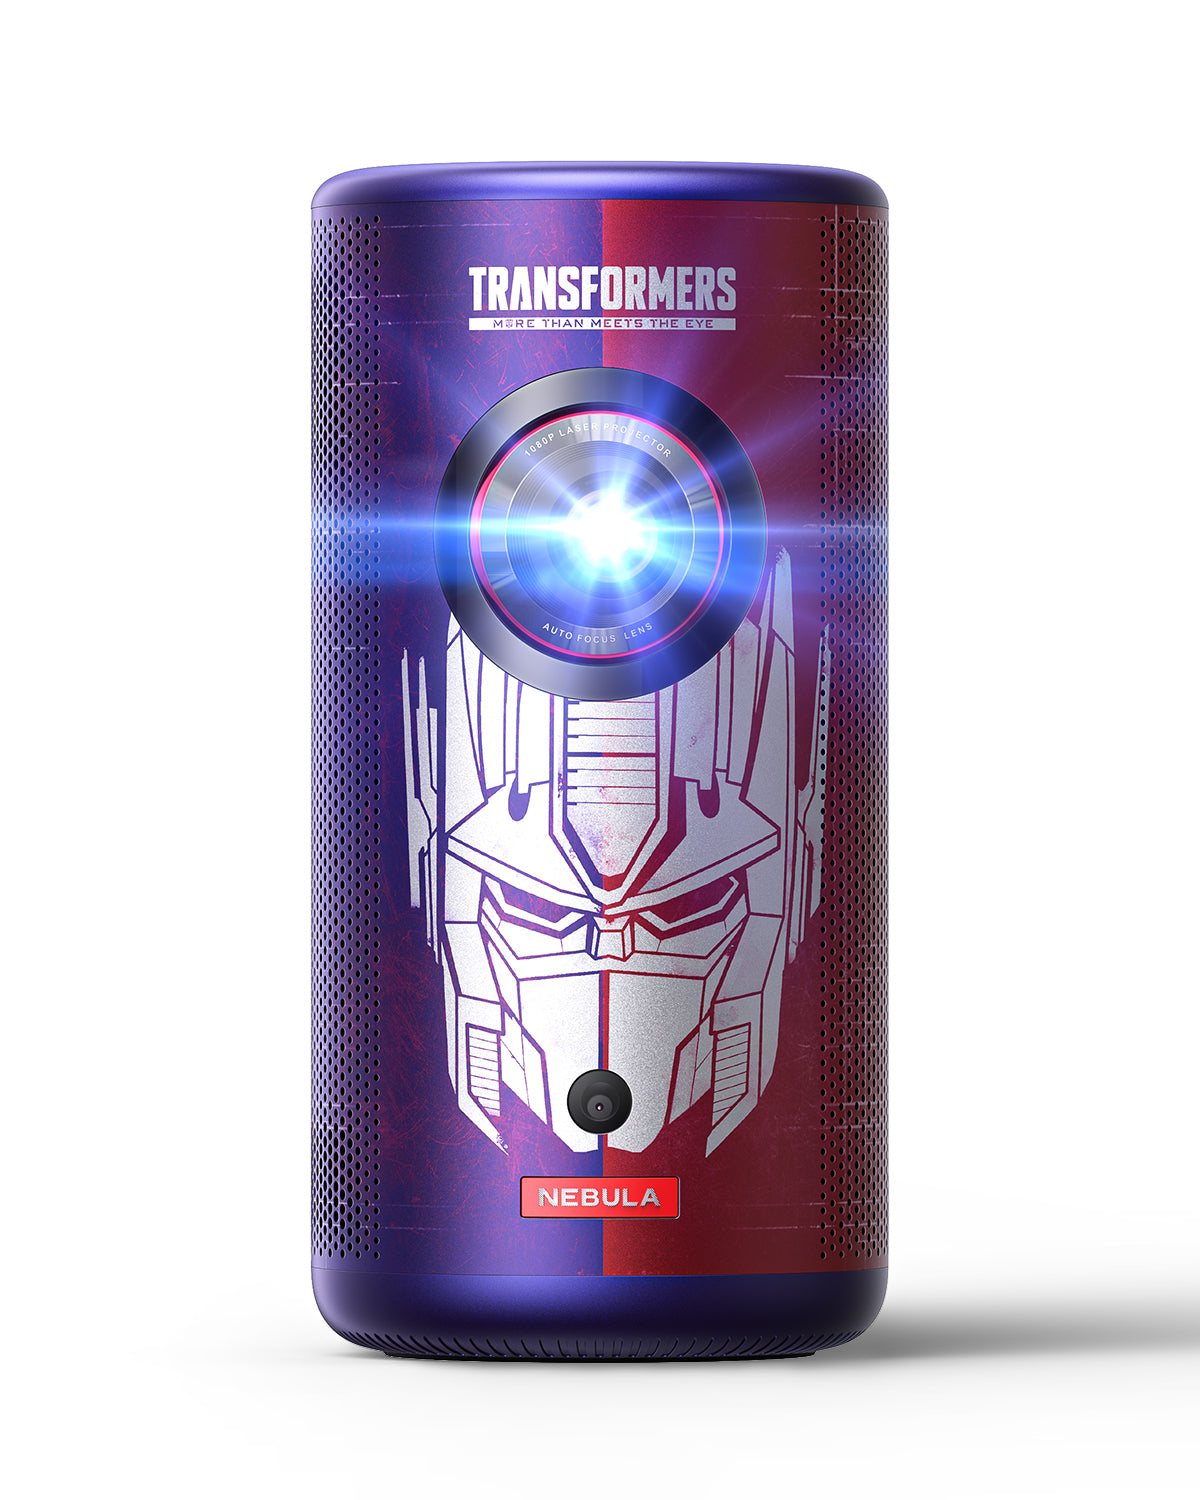 Capsule 3 Laser Transformers Special Edition